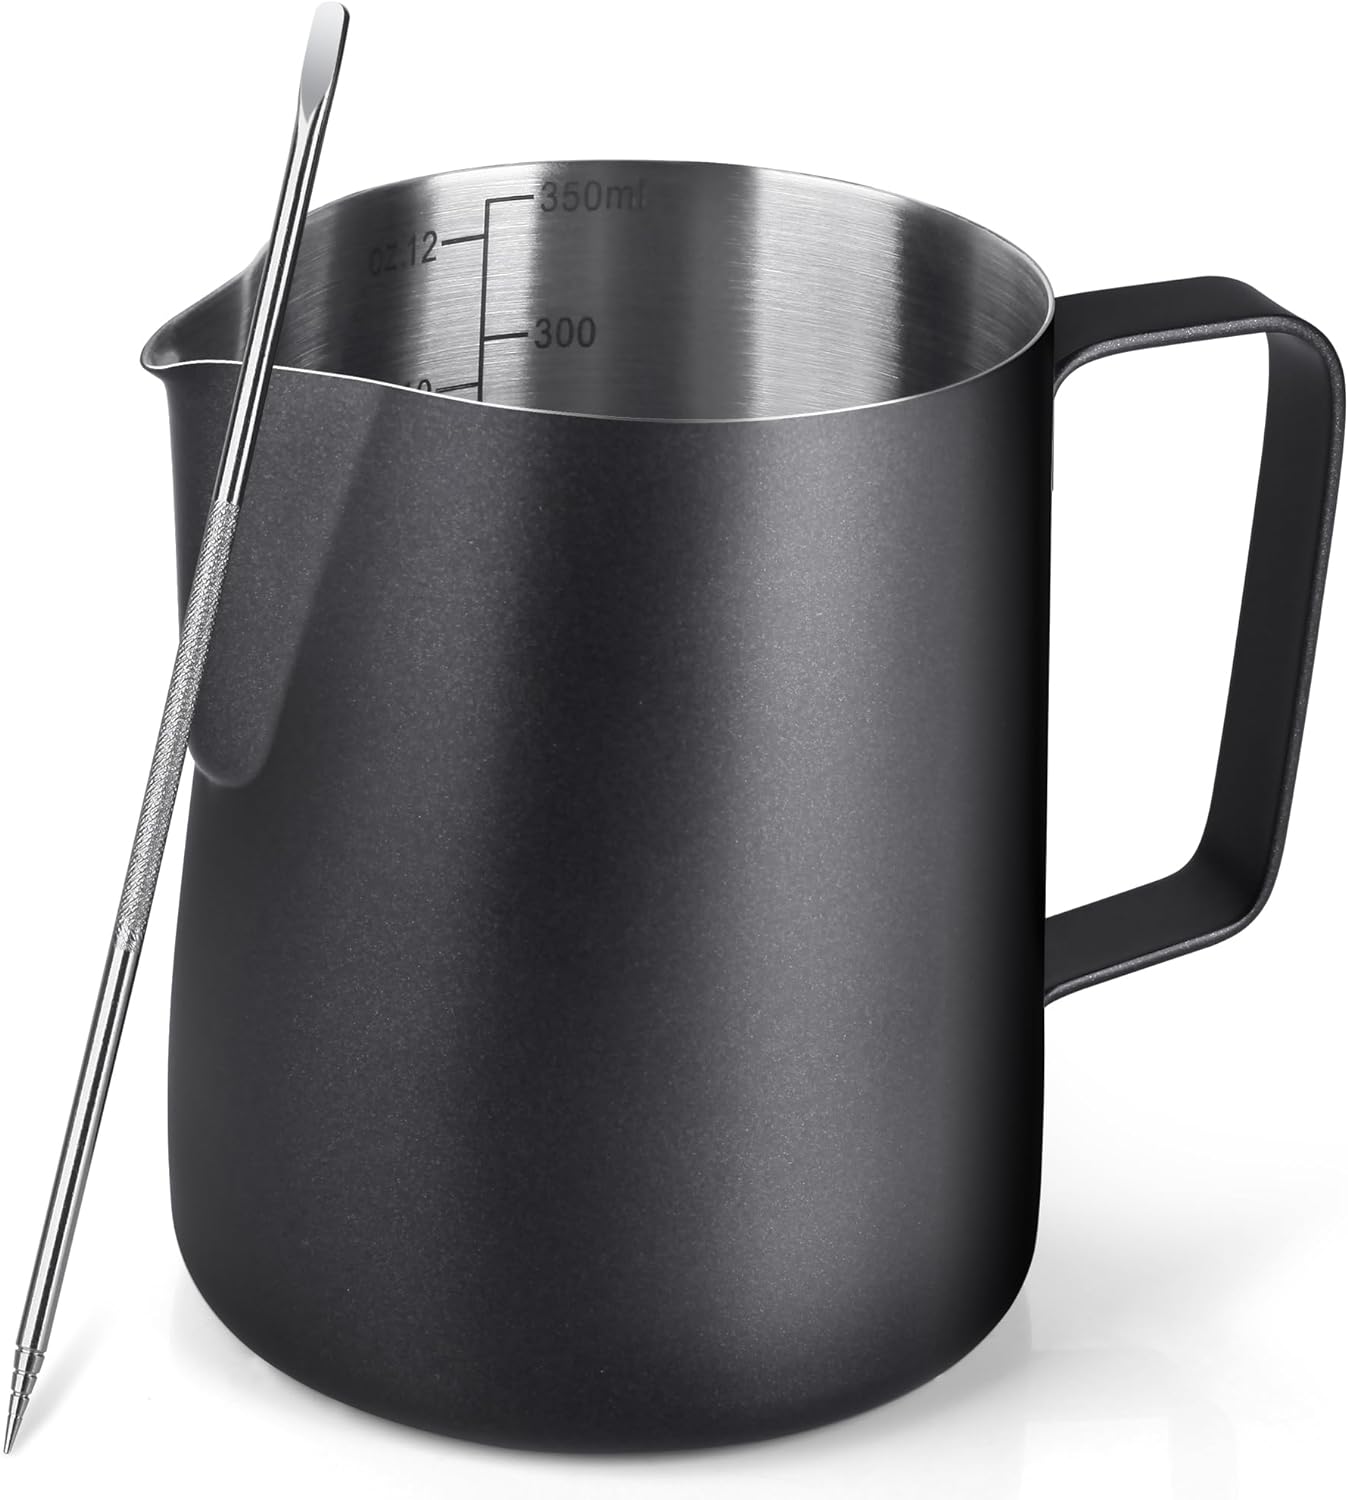 Milk Jug, 350 ml Stainless Steel Frothing Jug, 304 Stainless Steel Milk Frother and Latte Art Pen, Barista Accessories, Milk Jug Stainless Steel for Espresso cappuccino (12fl.oz, Black)